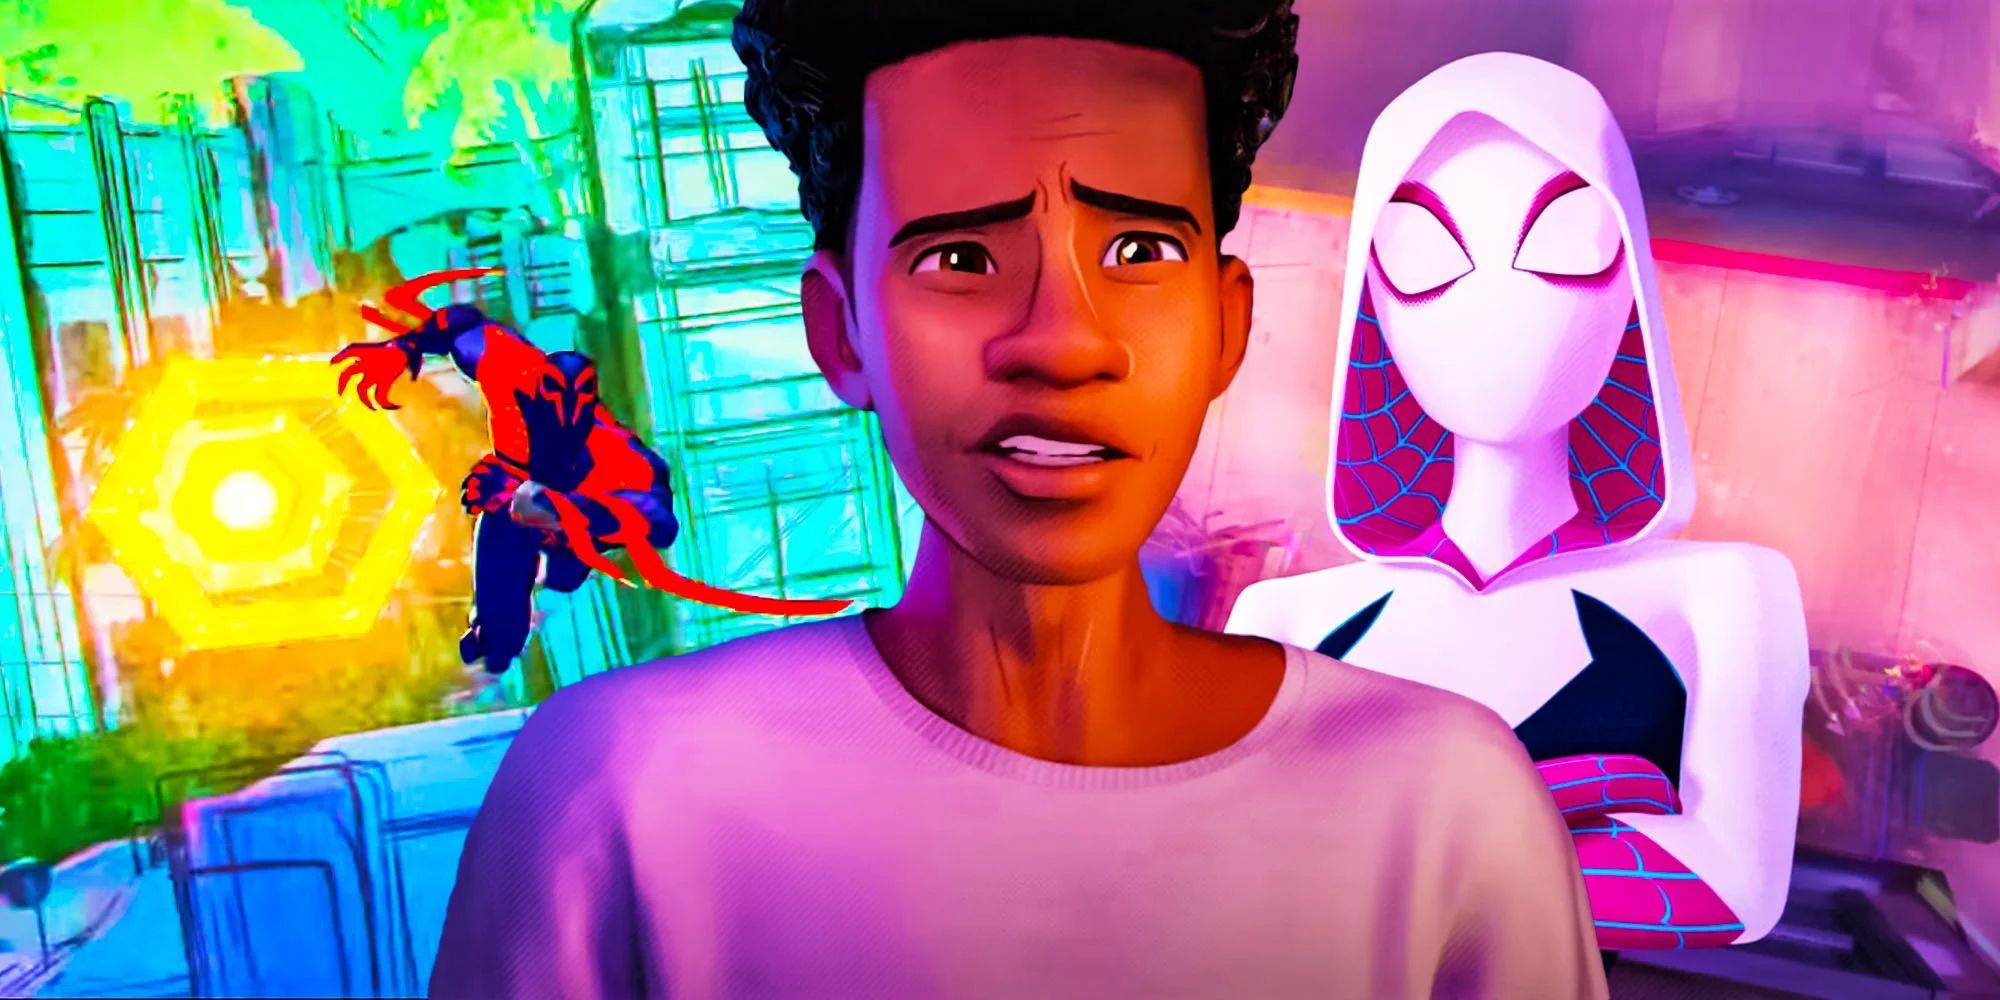 Spider-Man: Across The Spider-Verse Trailer Promises Dazzling Action And  Deep Emotion, Movies